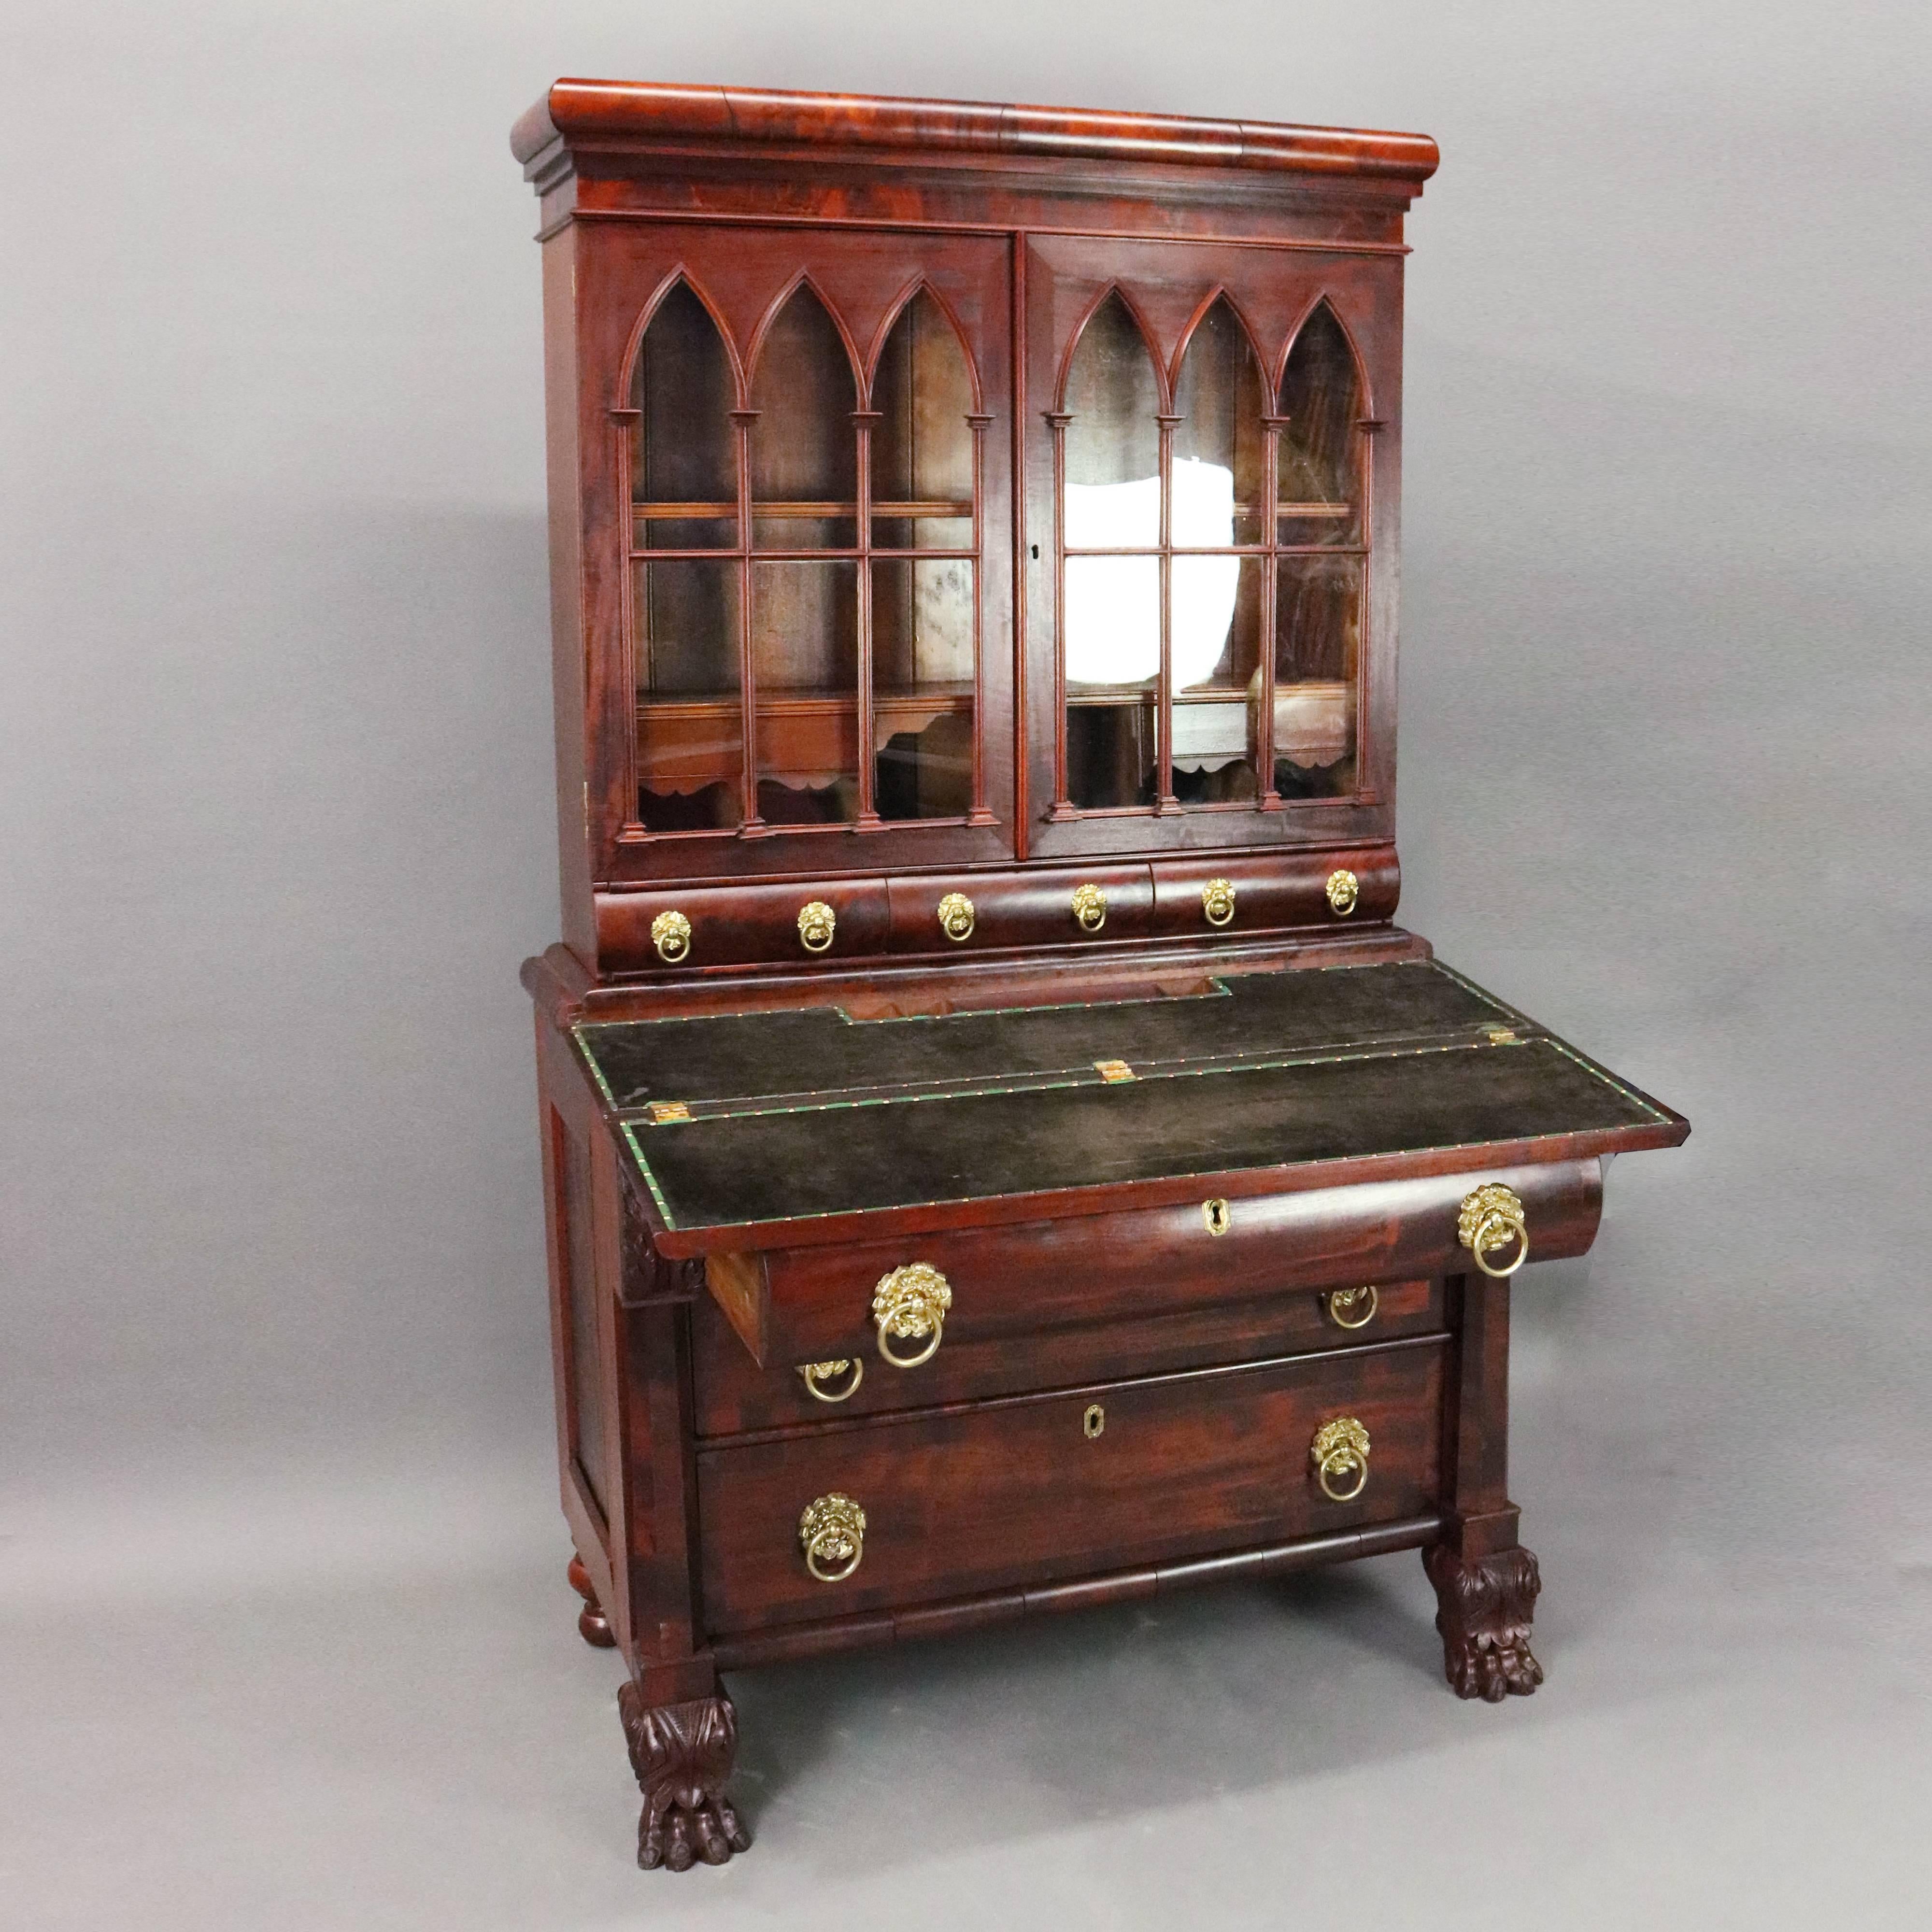 Antique American Empire secretary features flame mahogany construction with three long drawers in lower cabinet seated on highly detailed carved acanthus paw feet, leather flip top writing surface, all beneath bookcase with three small storage